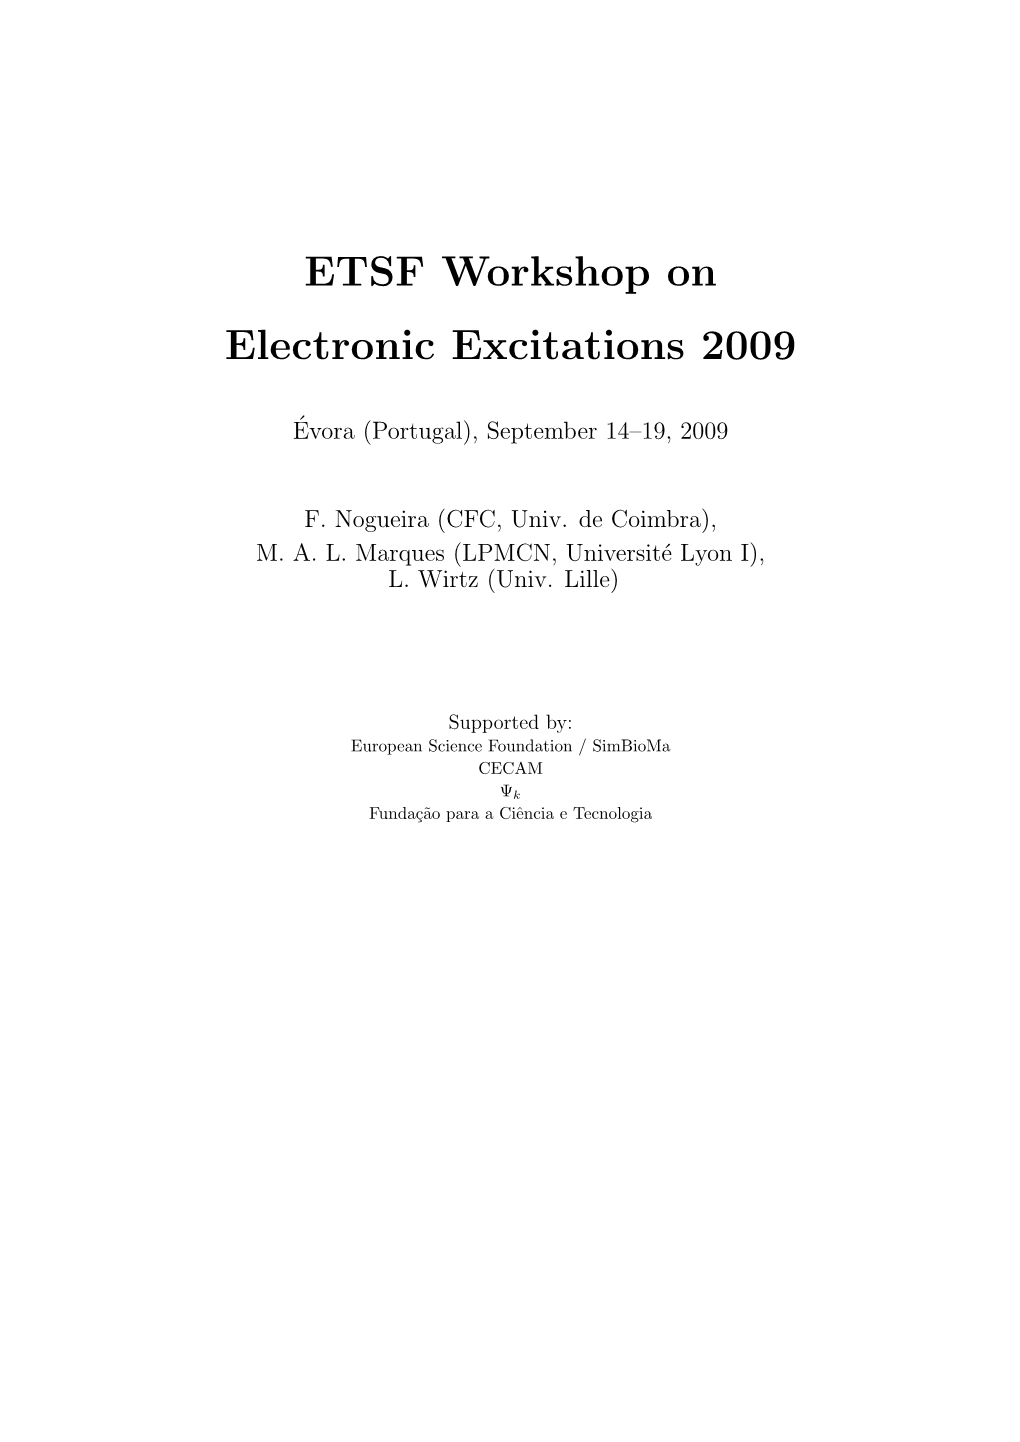 ETSF Workshop on Electronic Excitations 2009